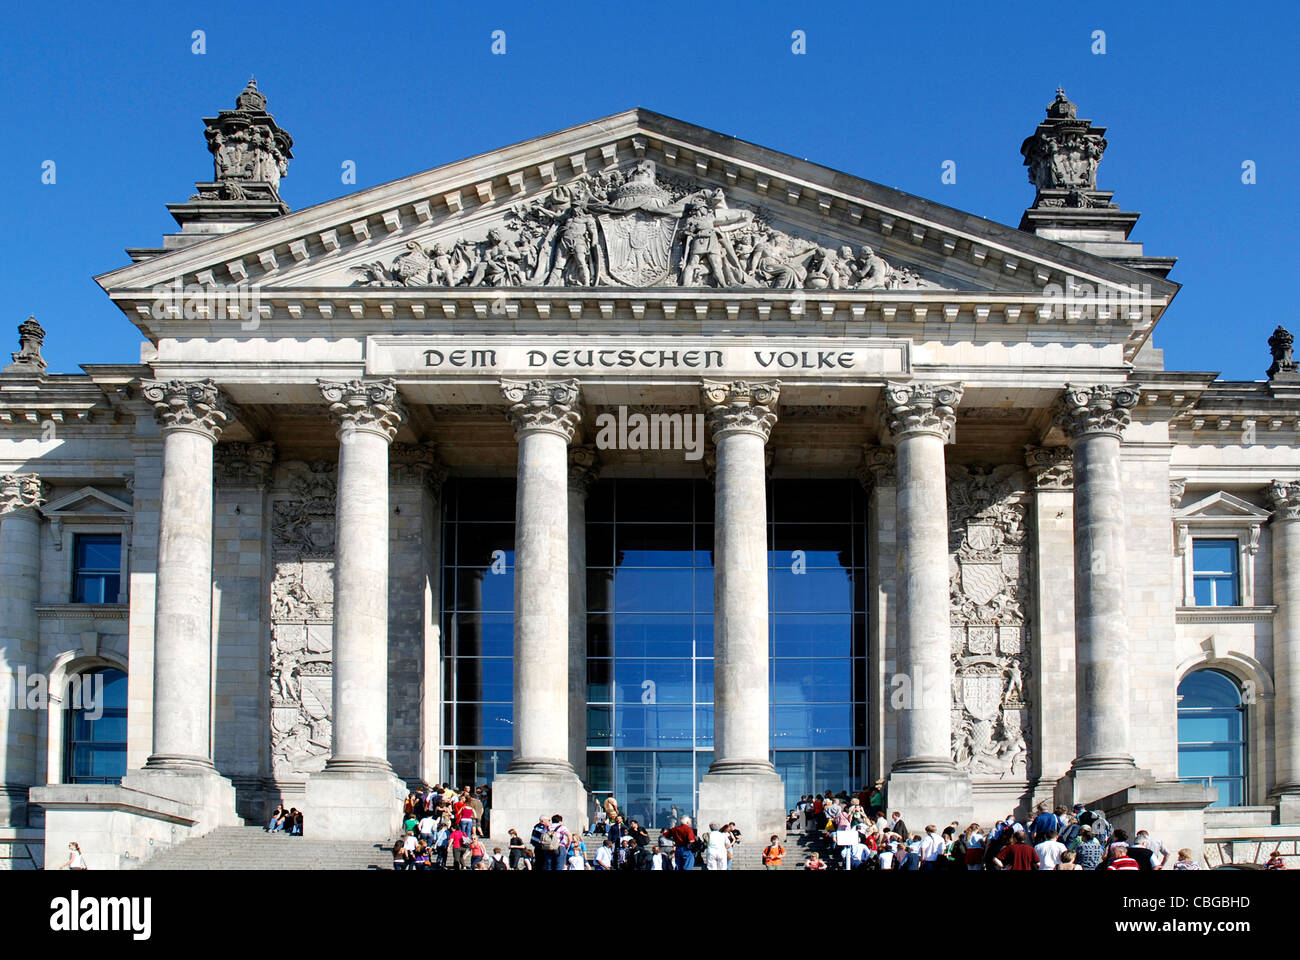 German Reichstag building in Berlin - Seat of the German Federal Parliament Bundestag. Stock Photo